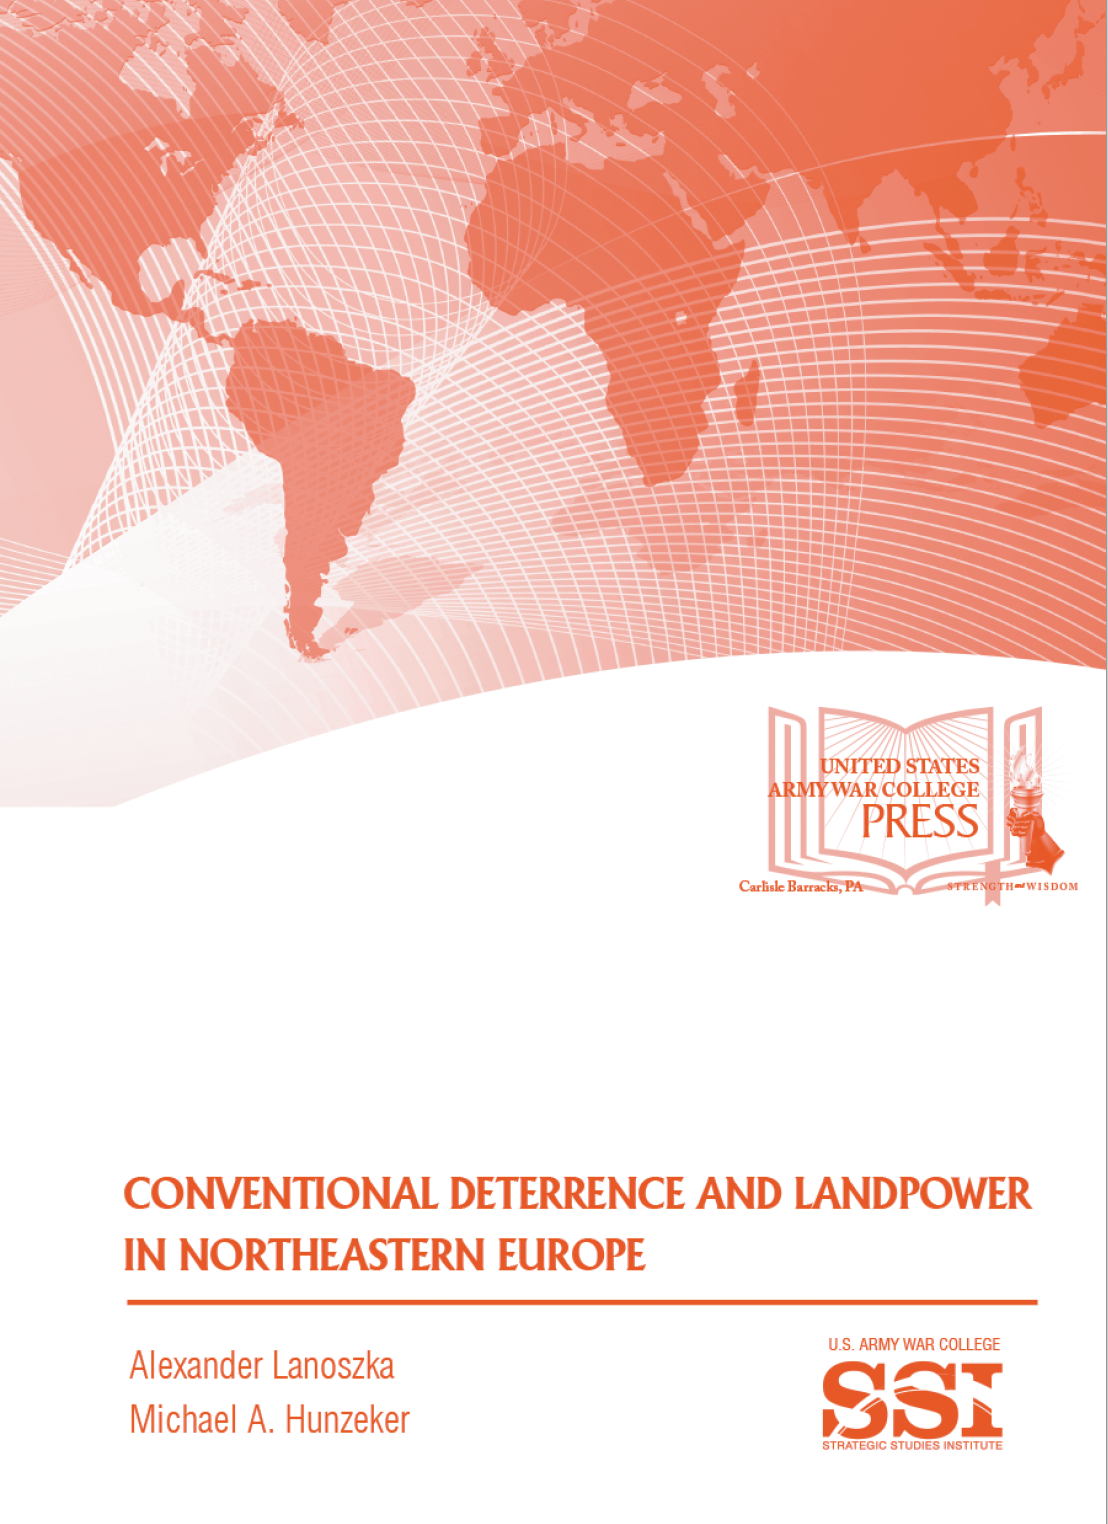 Conventional Deterrence and Landpower in Northeastern Europe book cover.